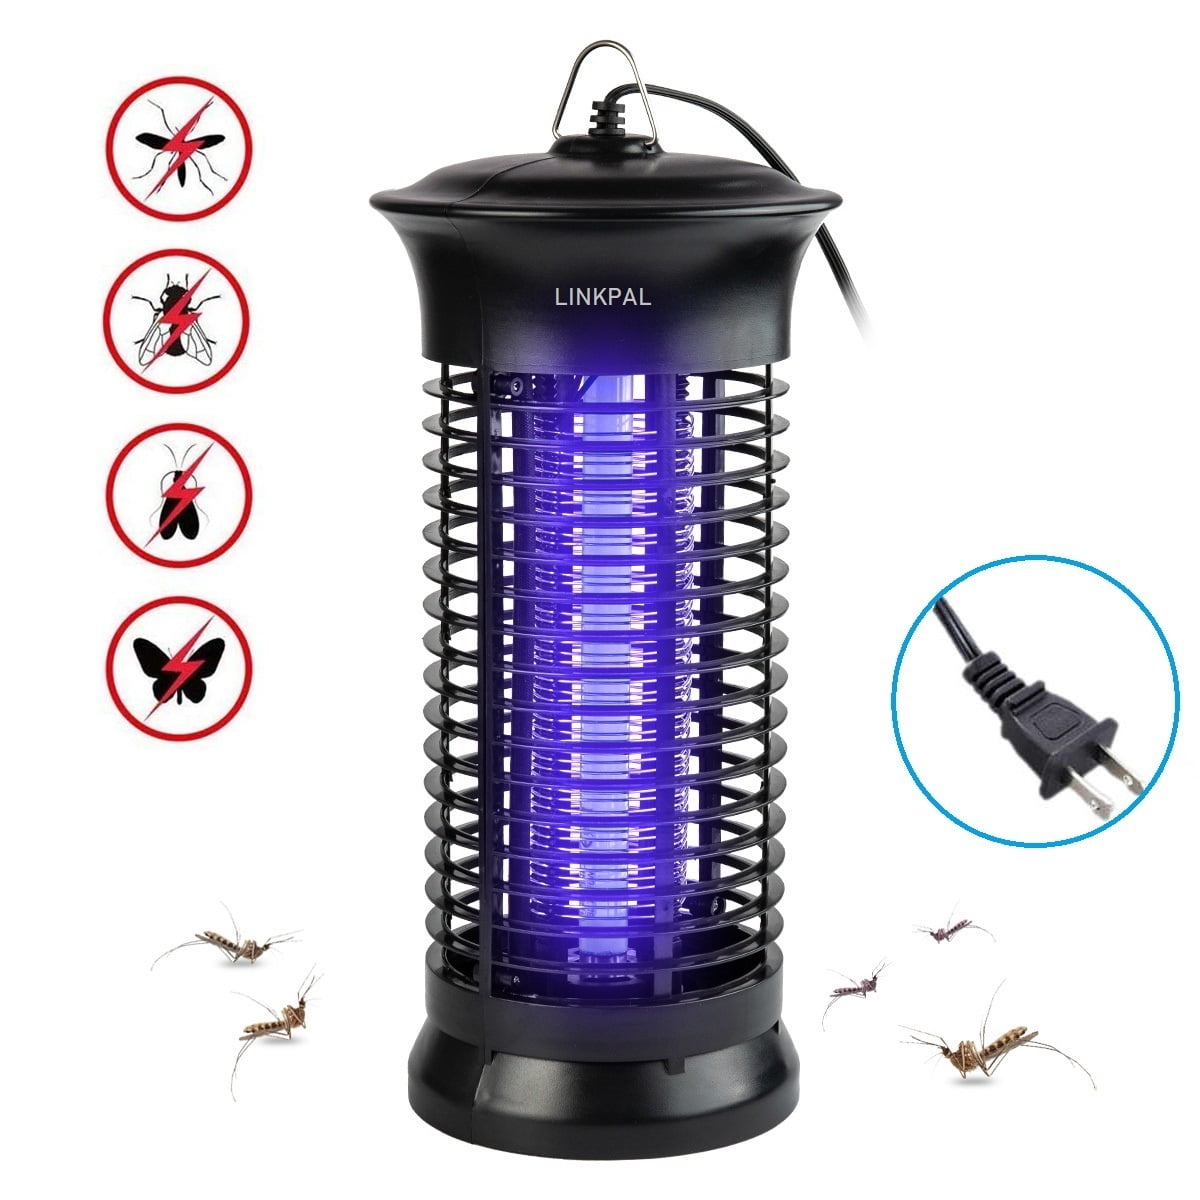 Home fomei Bug Zapper Updated Office Kitchen Mosquito Killer Insect Trap Pest Control Light with Switch Button Electronic UV Lamp for Indoor Outdoor Bedroom 